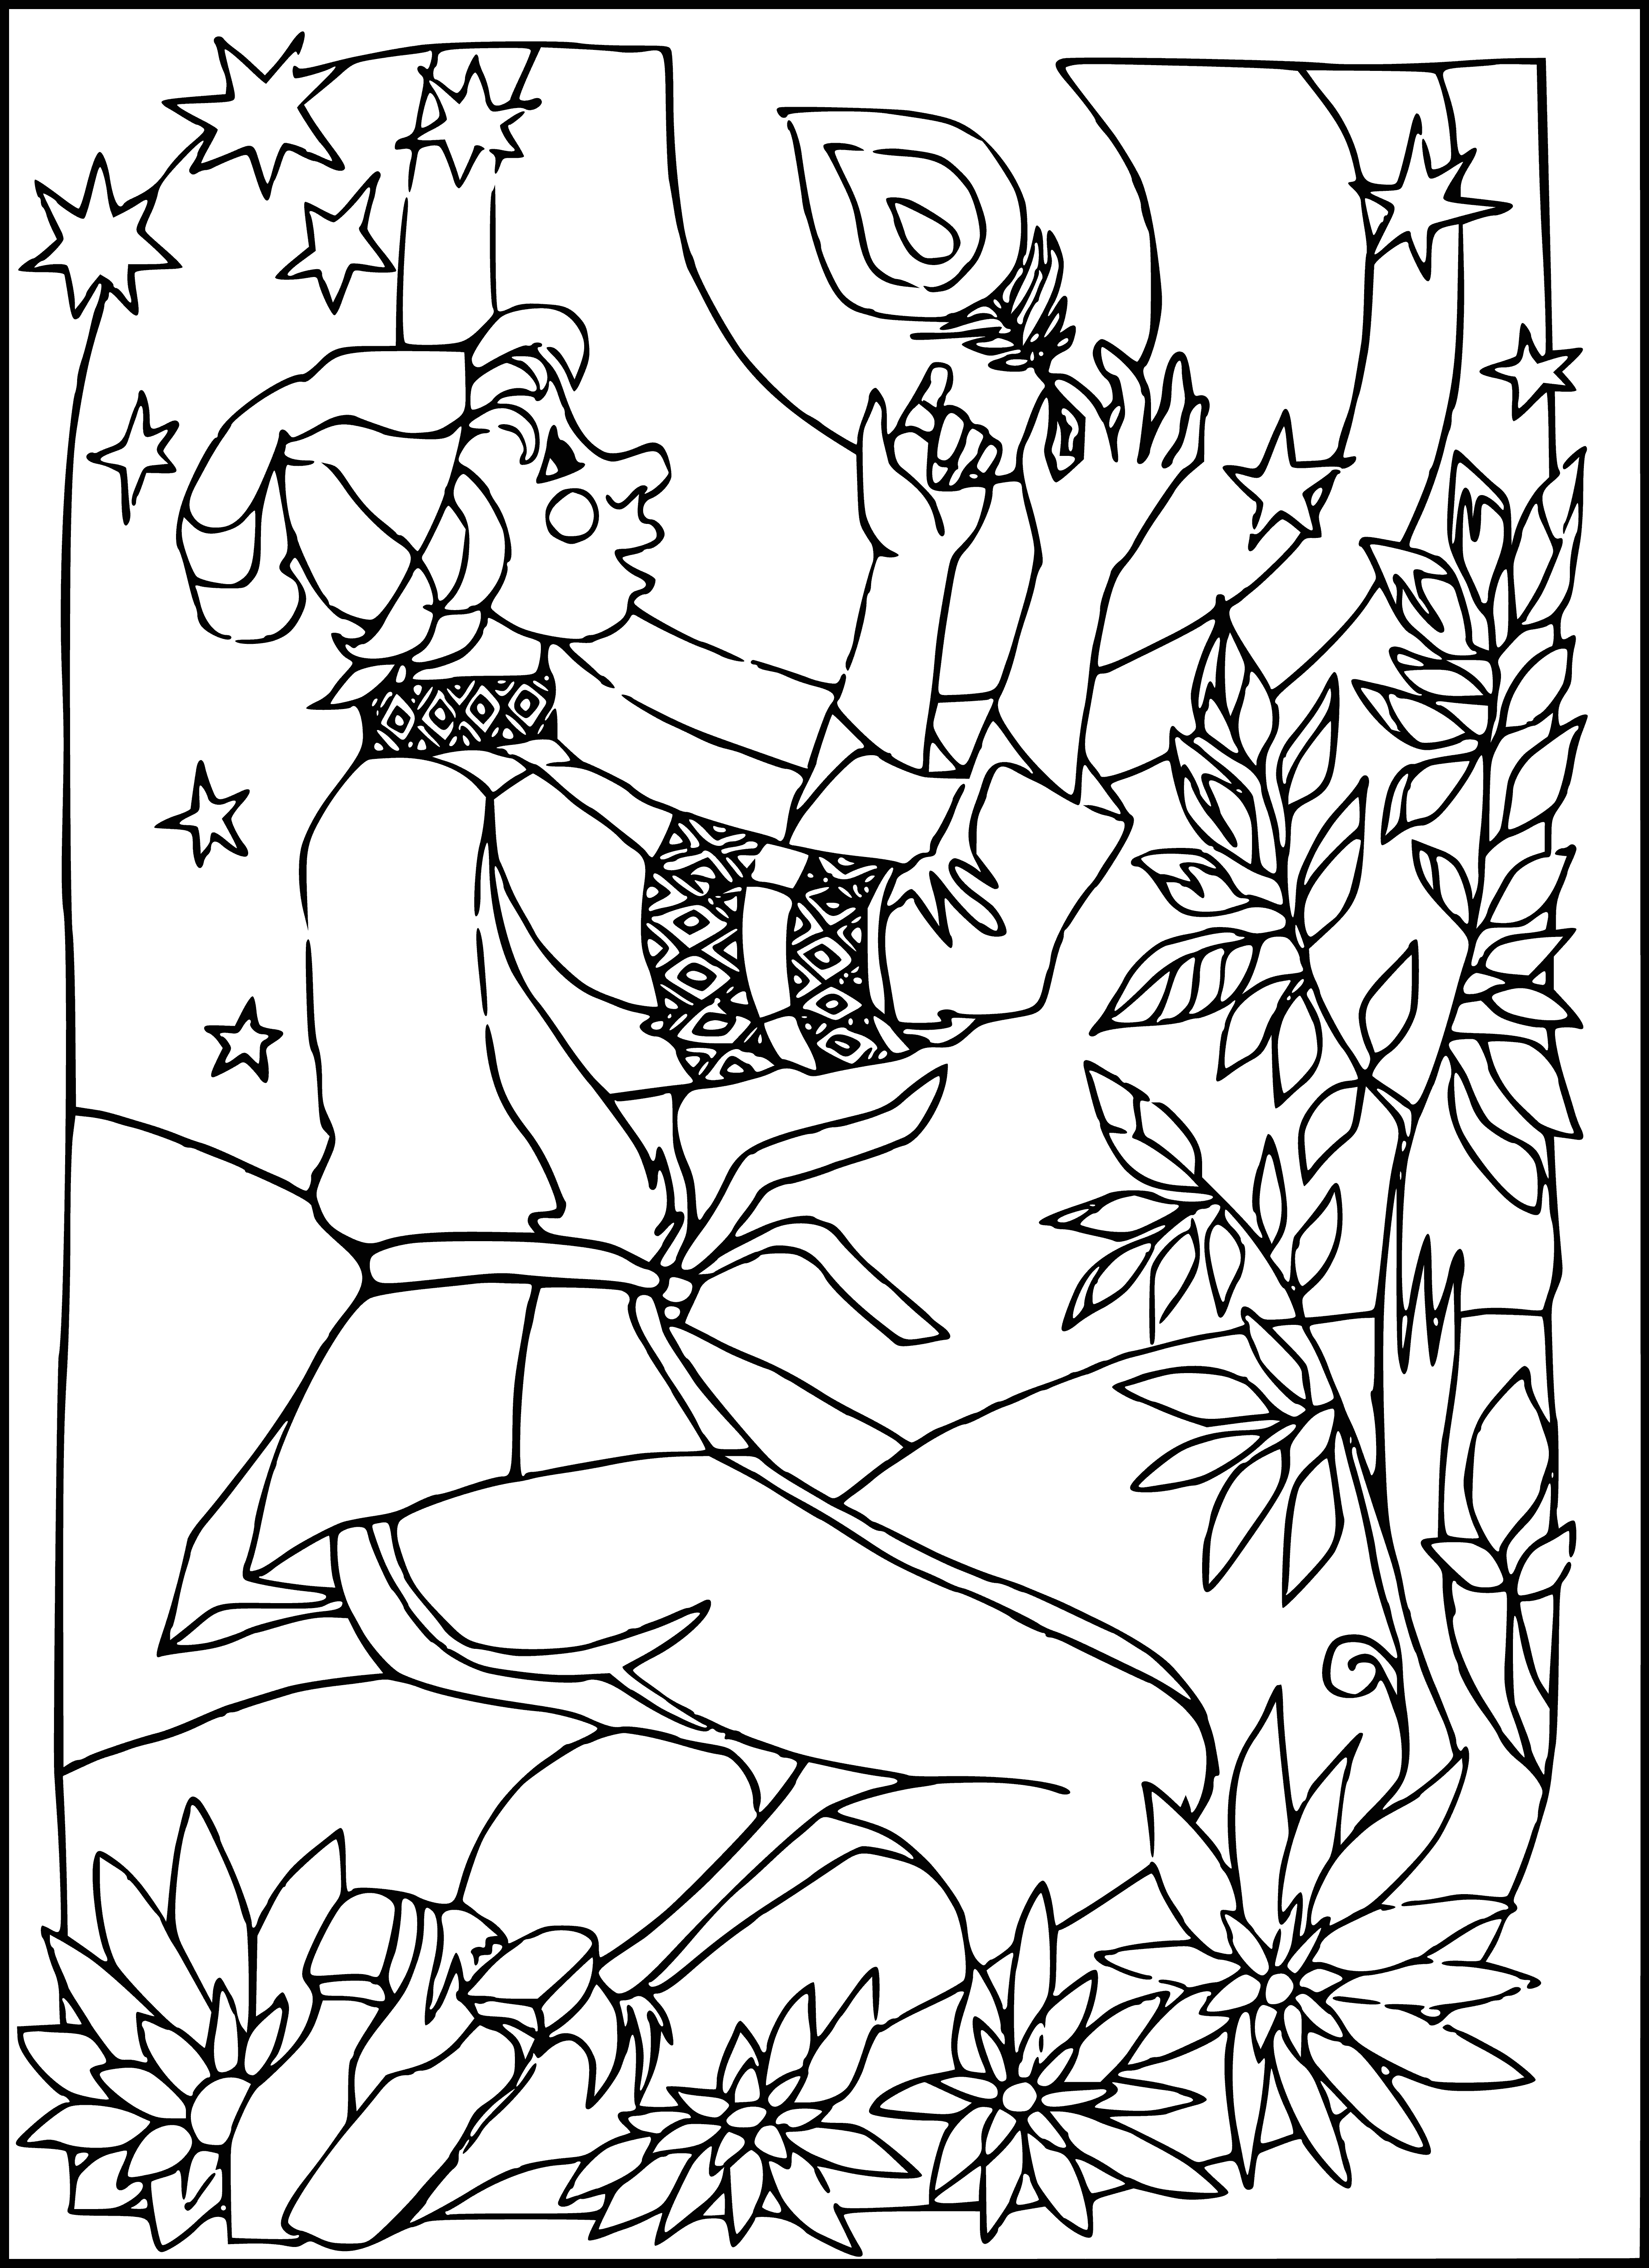 coloring page: A small horse with a hump happily eats grass in a meadow filled with flowers and trees.